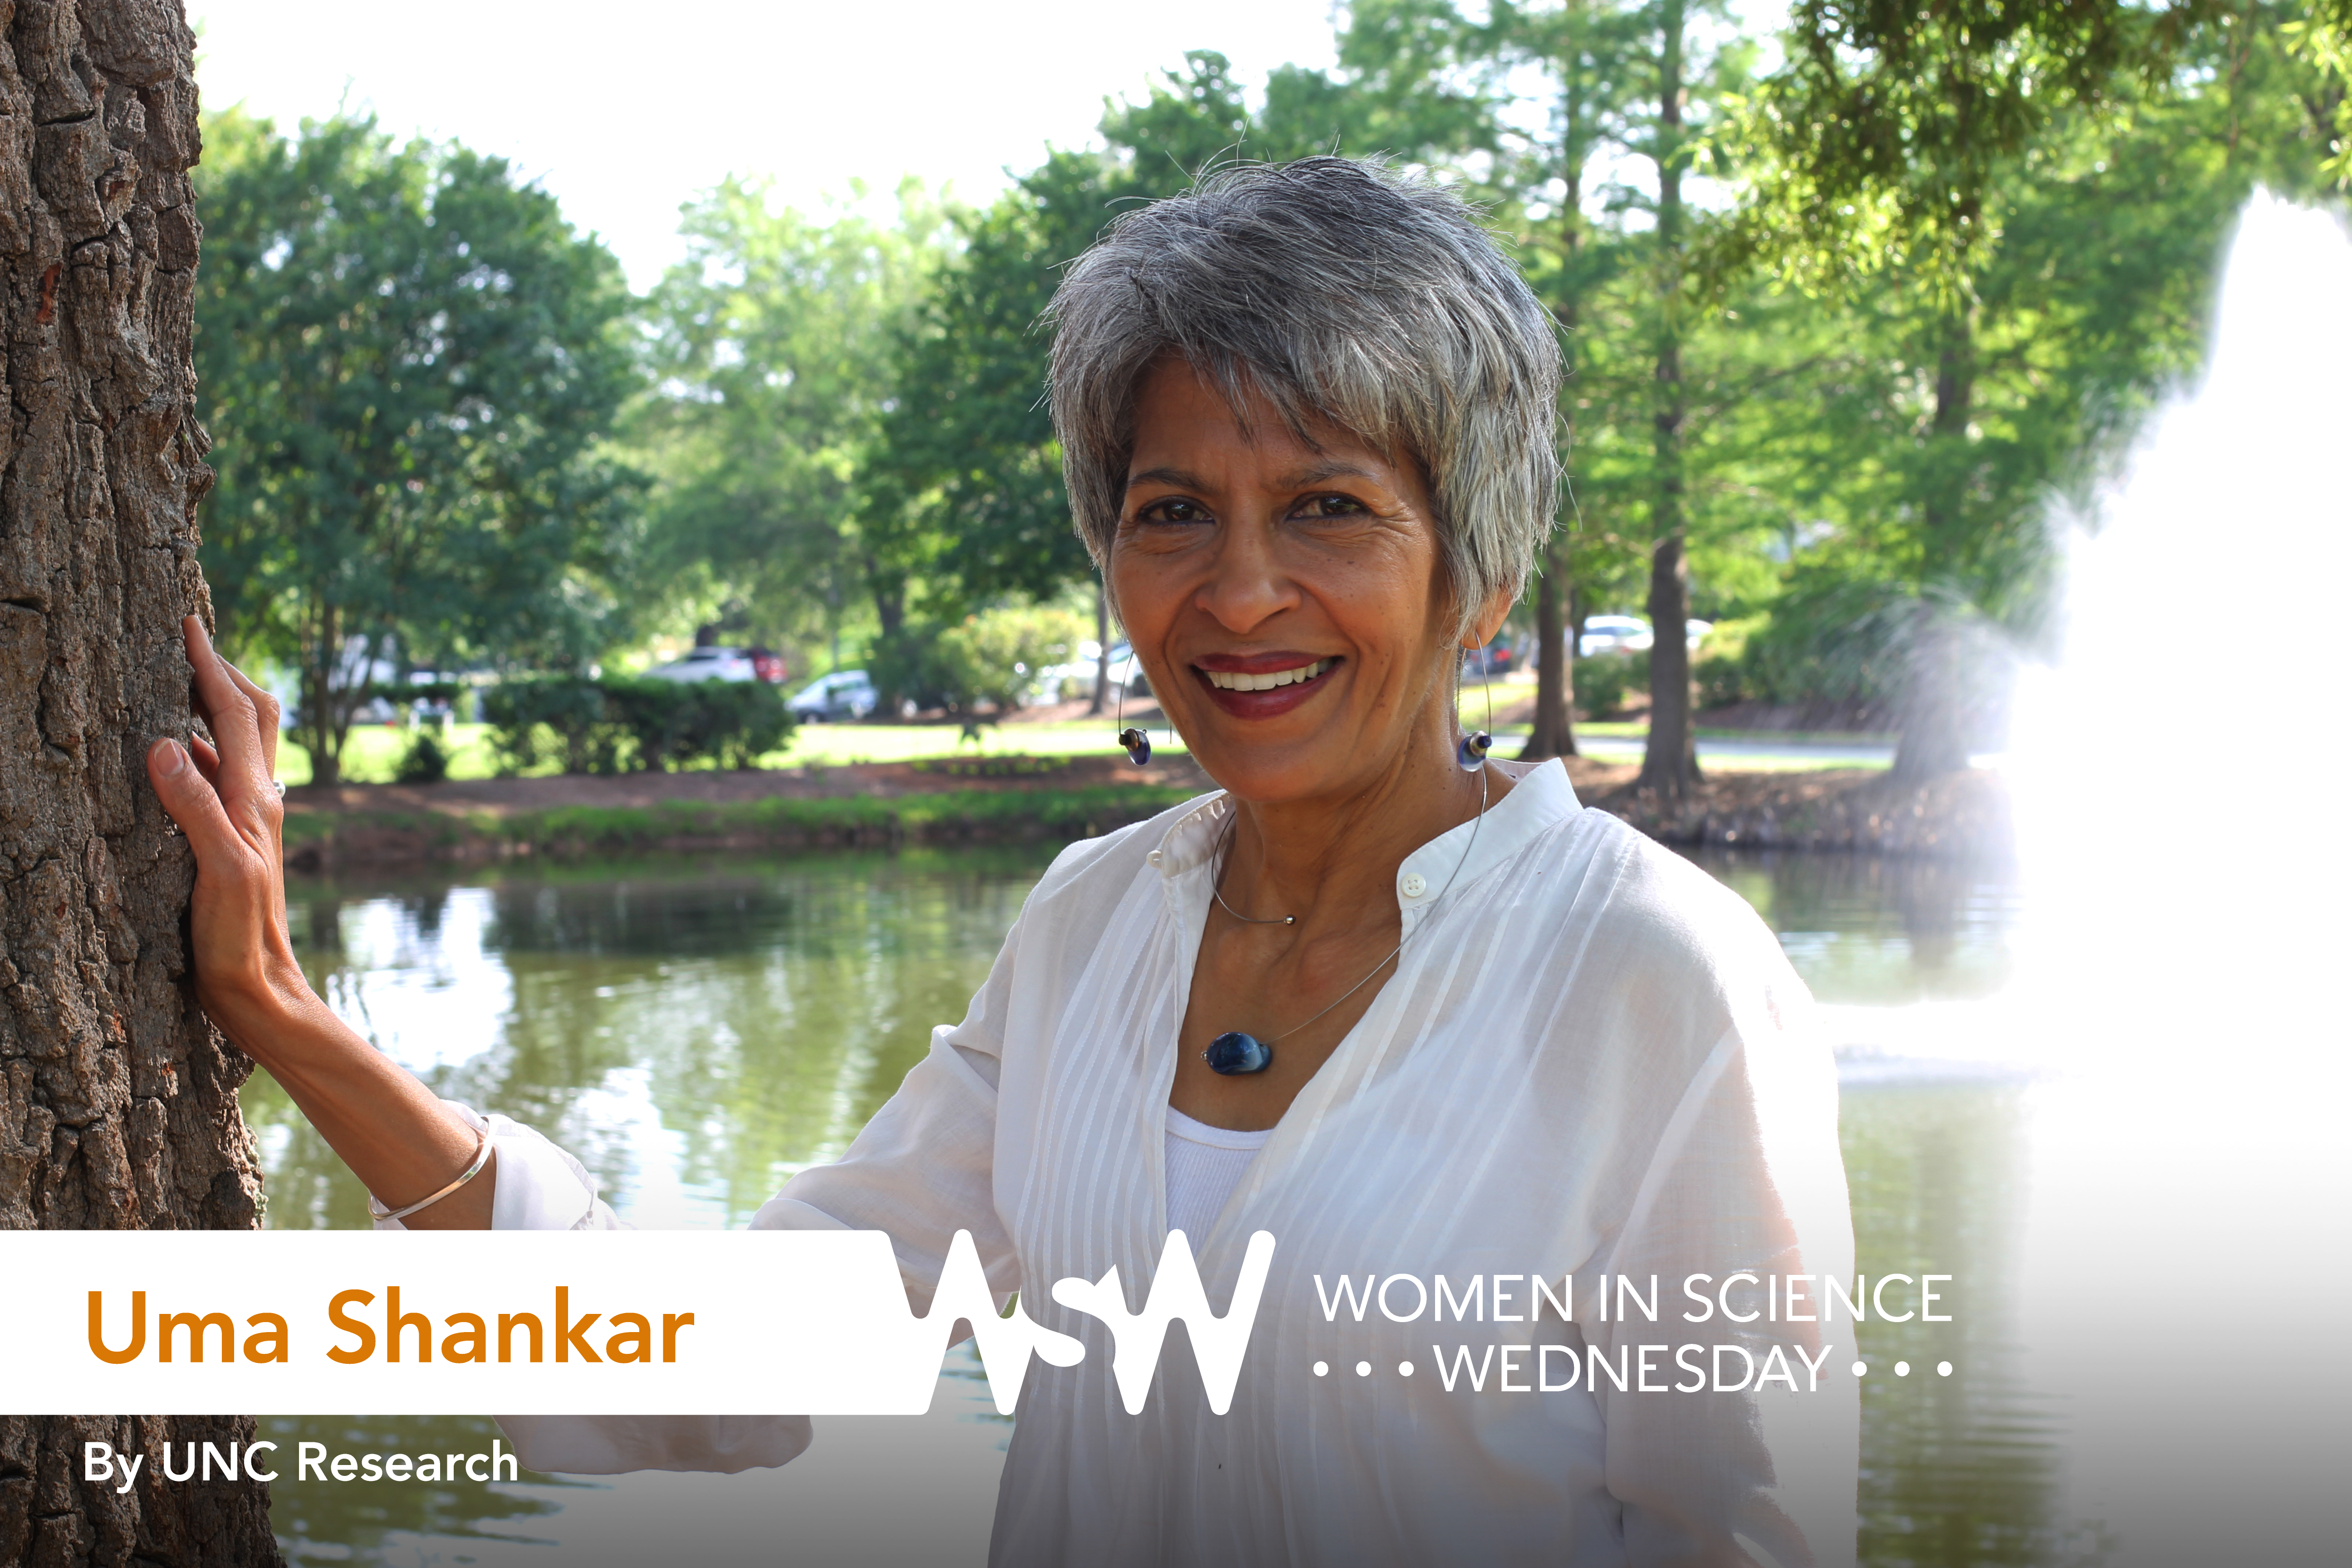 Uma Shankar poses in front of a lake with a fountain on campus